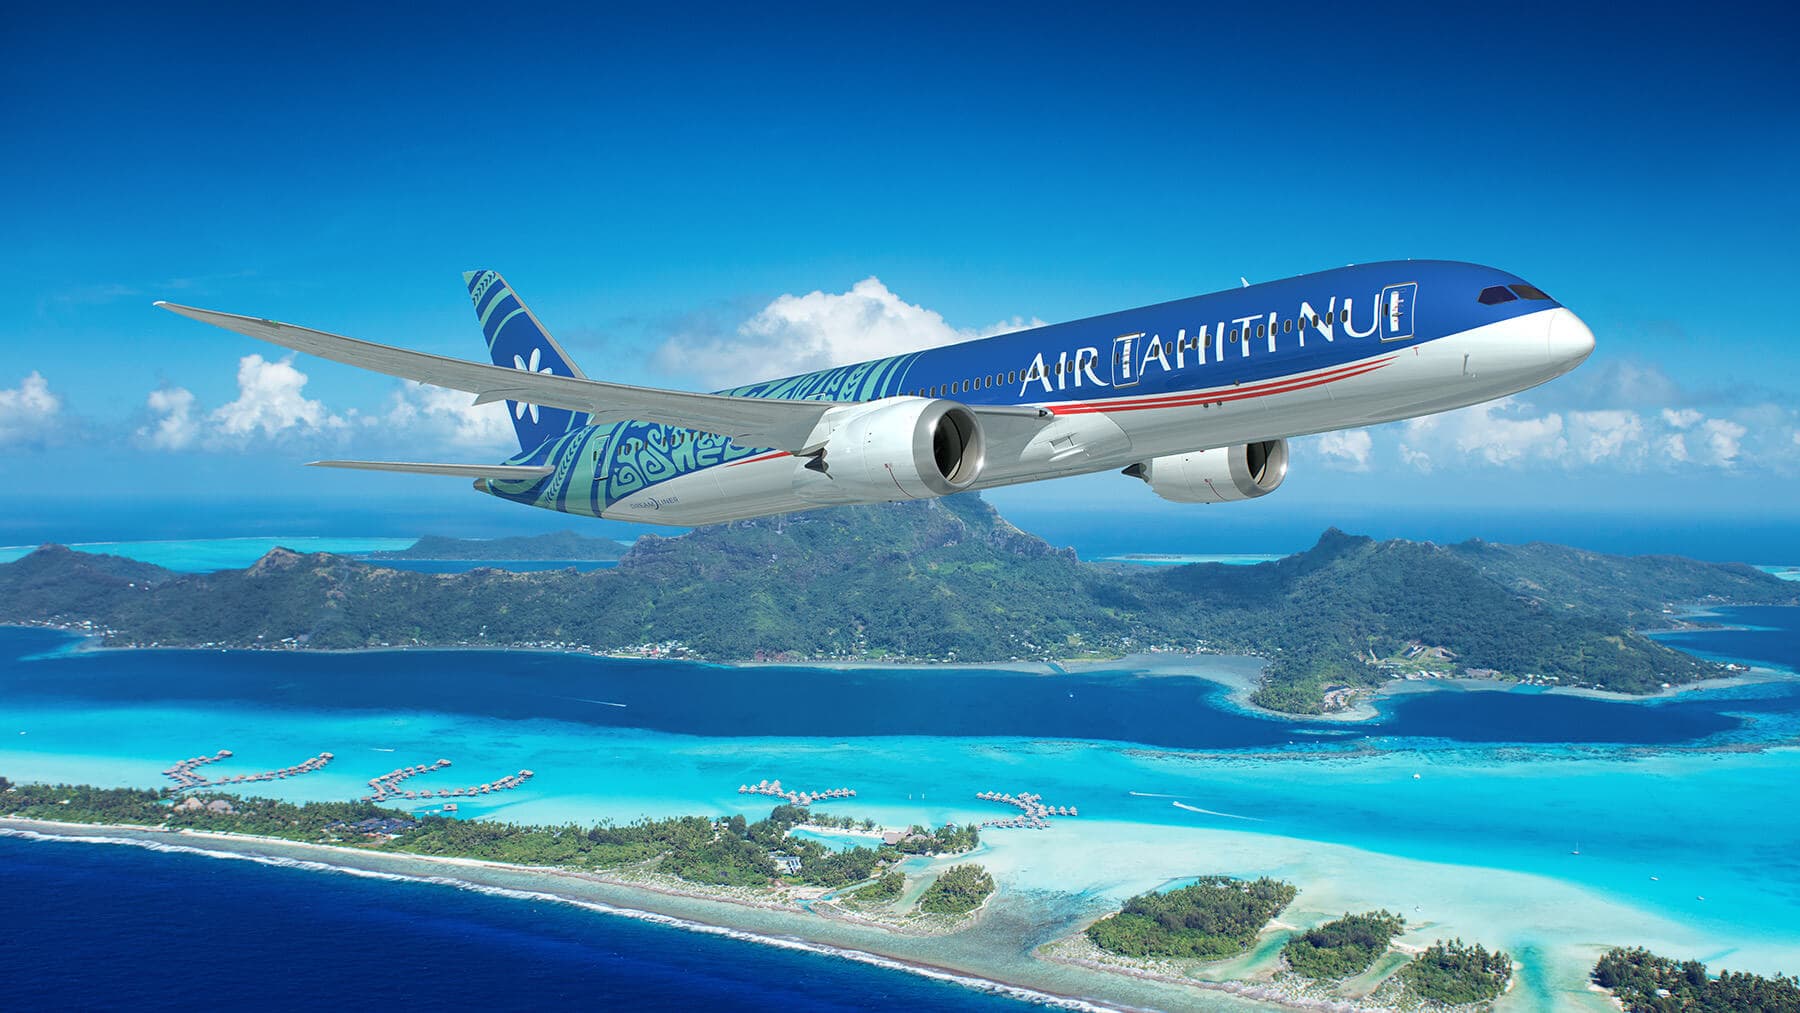 Air Tahiti Nui 787 flying over brilliant blue water